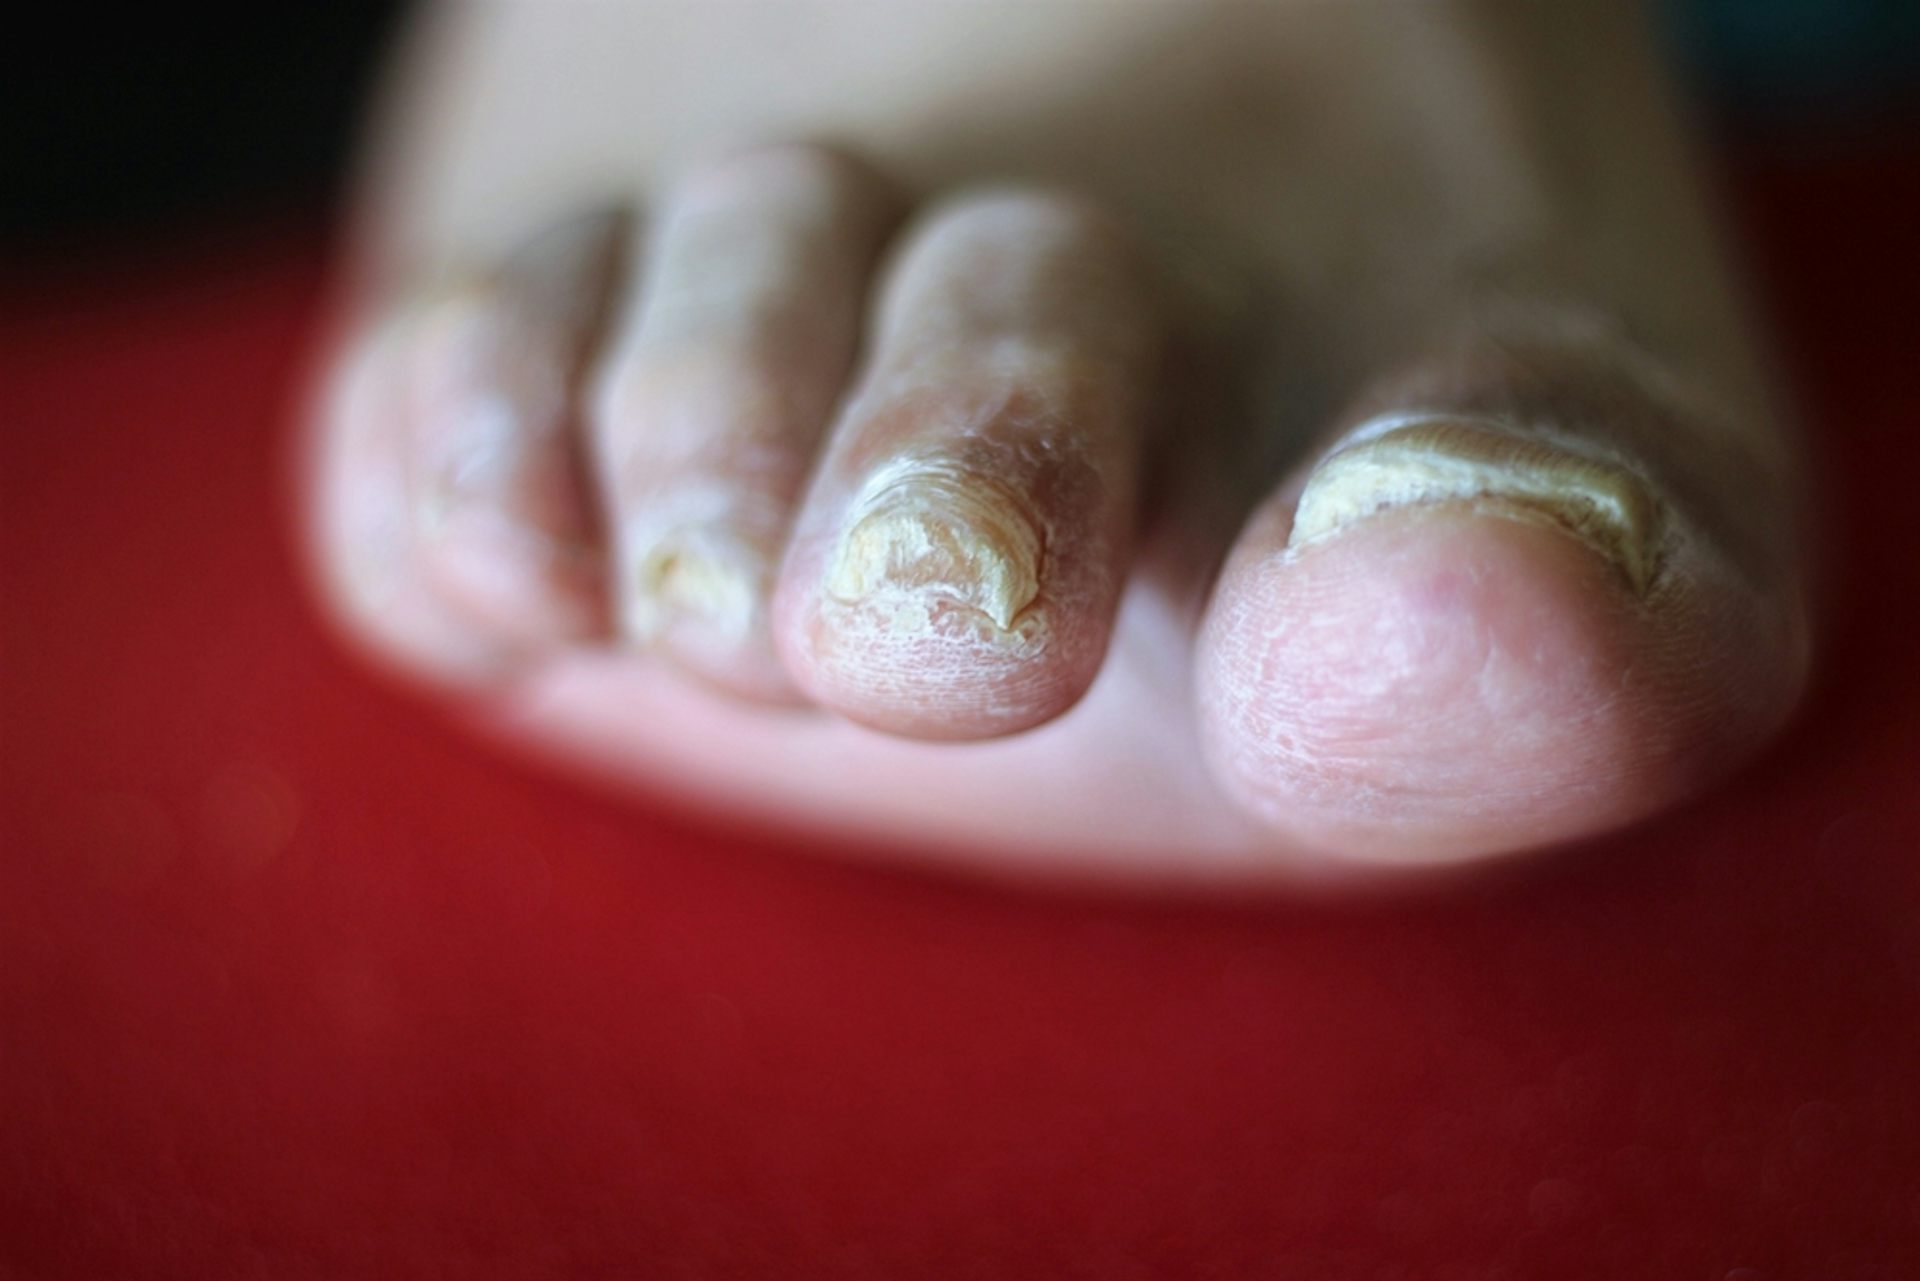 How to cure a fungal nail in my hand - Quora